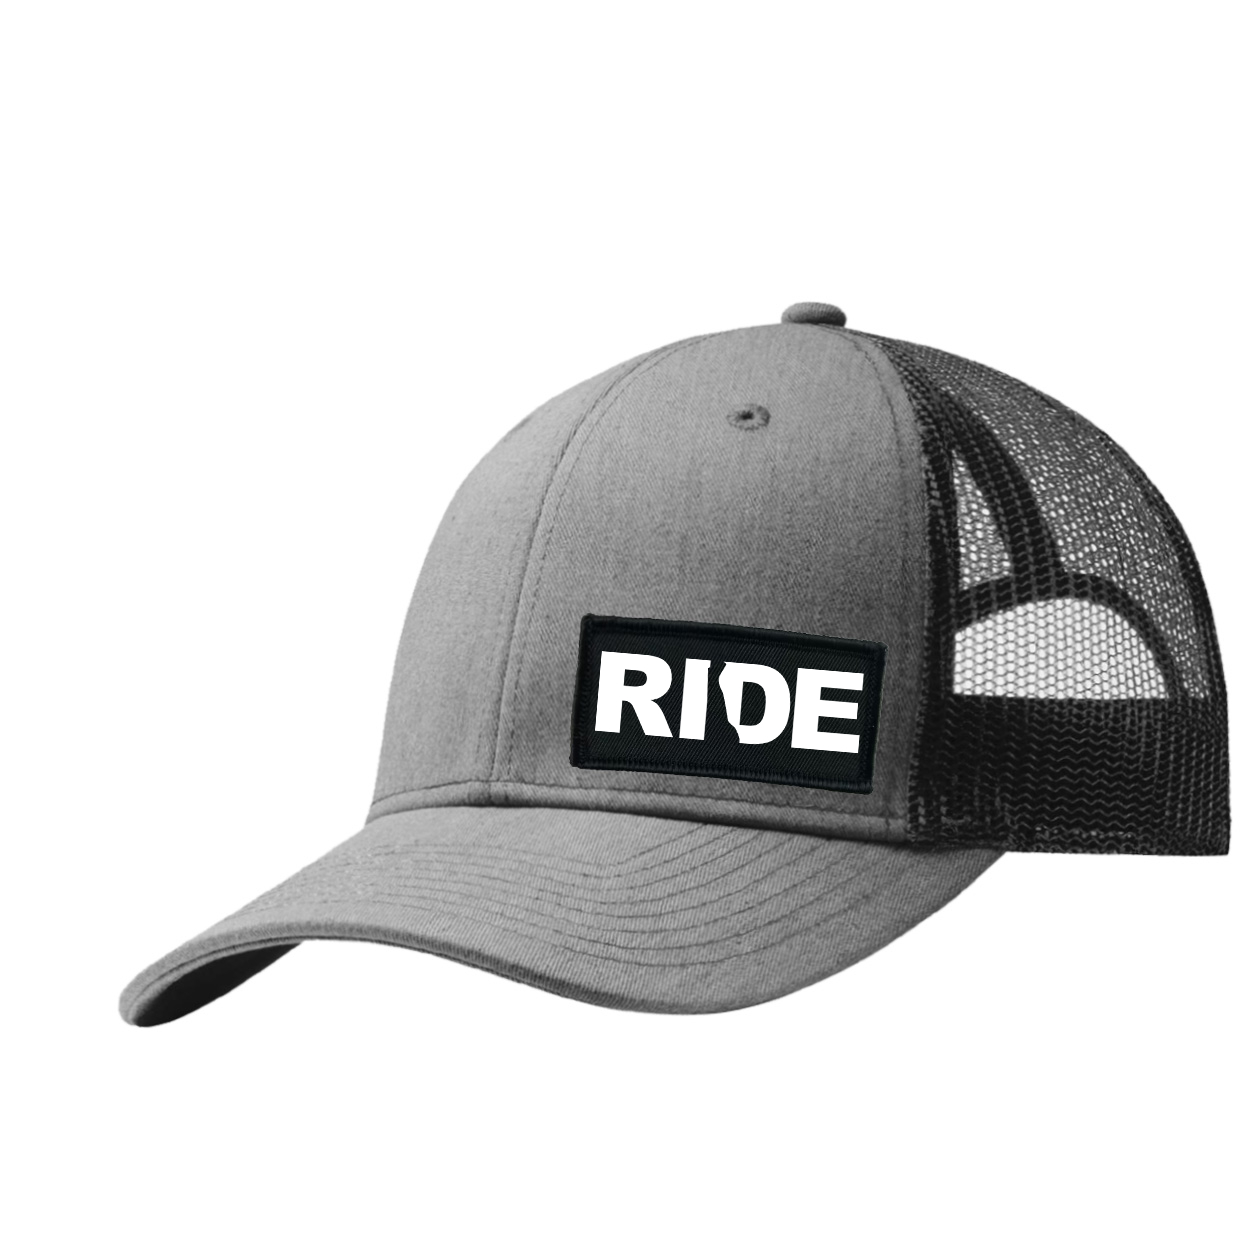 Ride Delaware Night Out Woven Patch Snapback Trucker Hat Heather Gray/Black (White Logo)